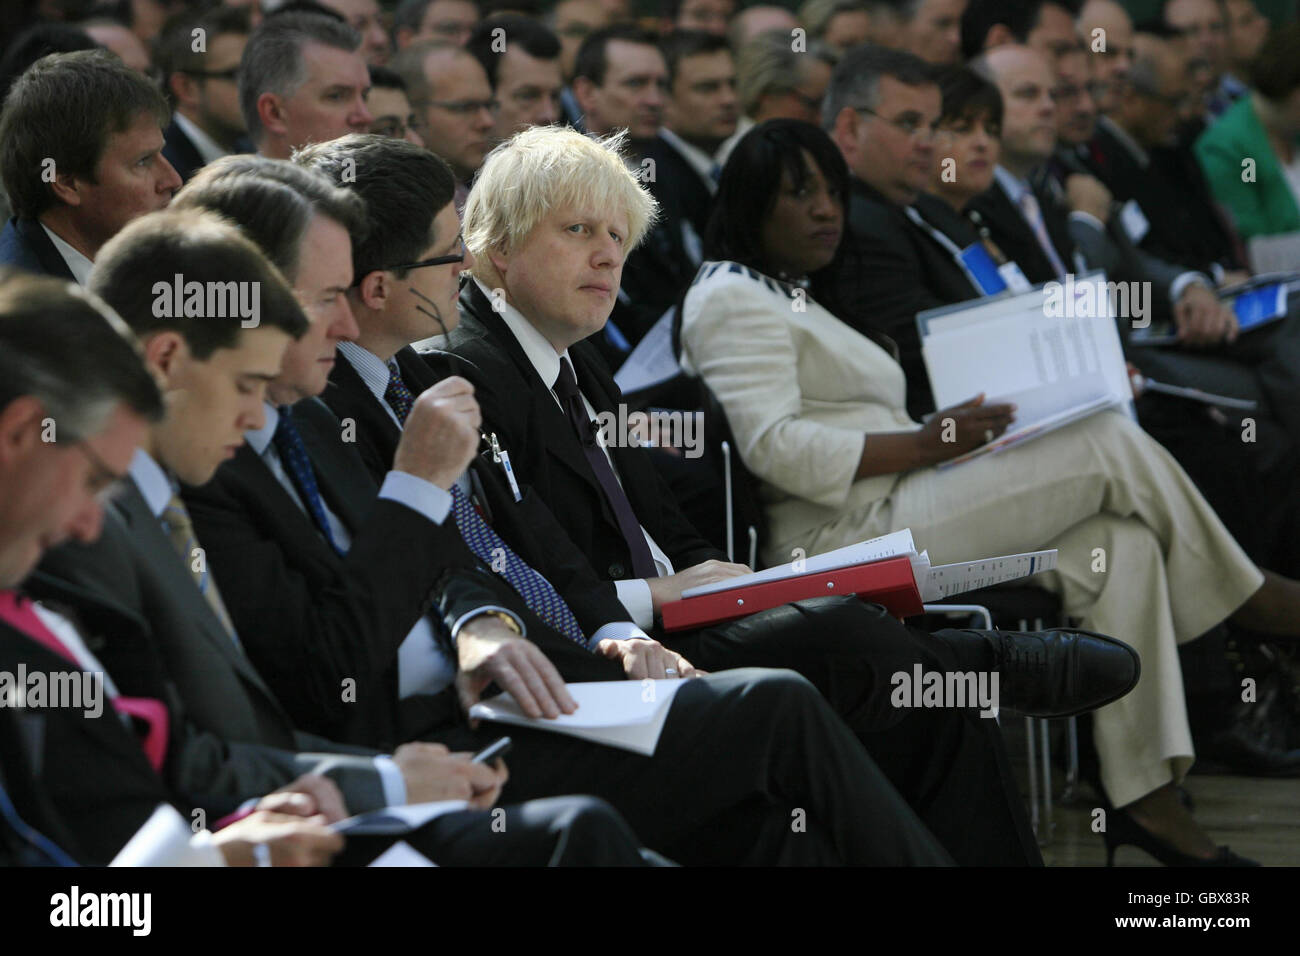 The Mayor of London Boris Johnson (5th left) and the Secretary of State for Business, Innovation and Skills Lord Mandelson (3rd left) attend a major economic conference held at the Royal Opera House in central London. Stock Photo